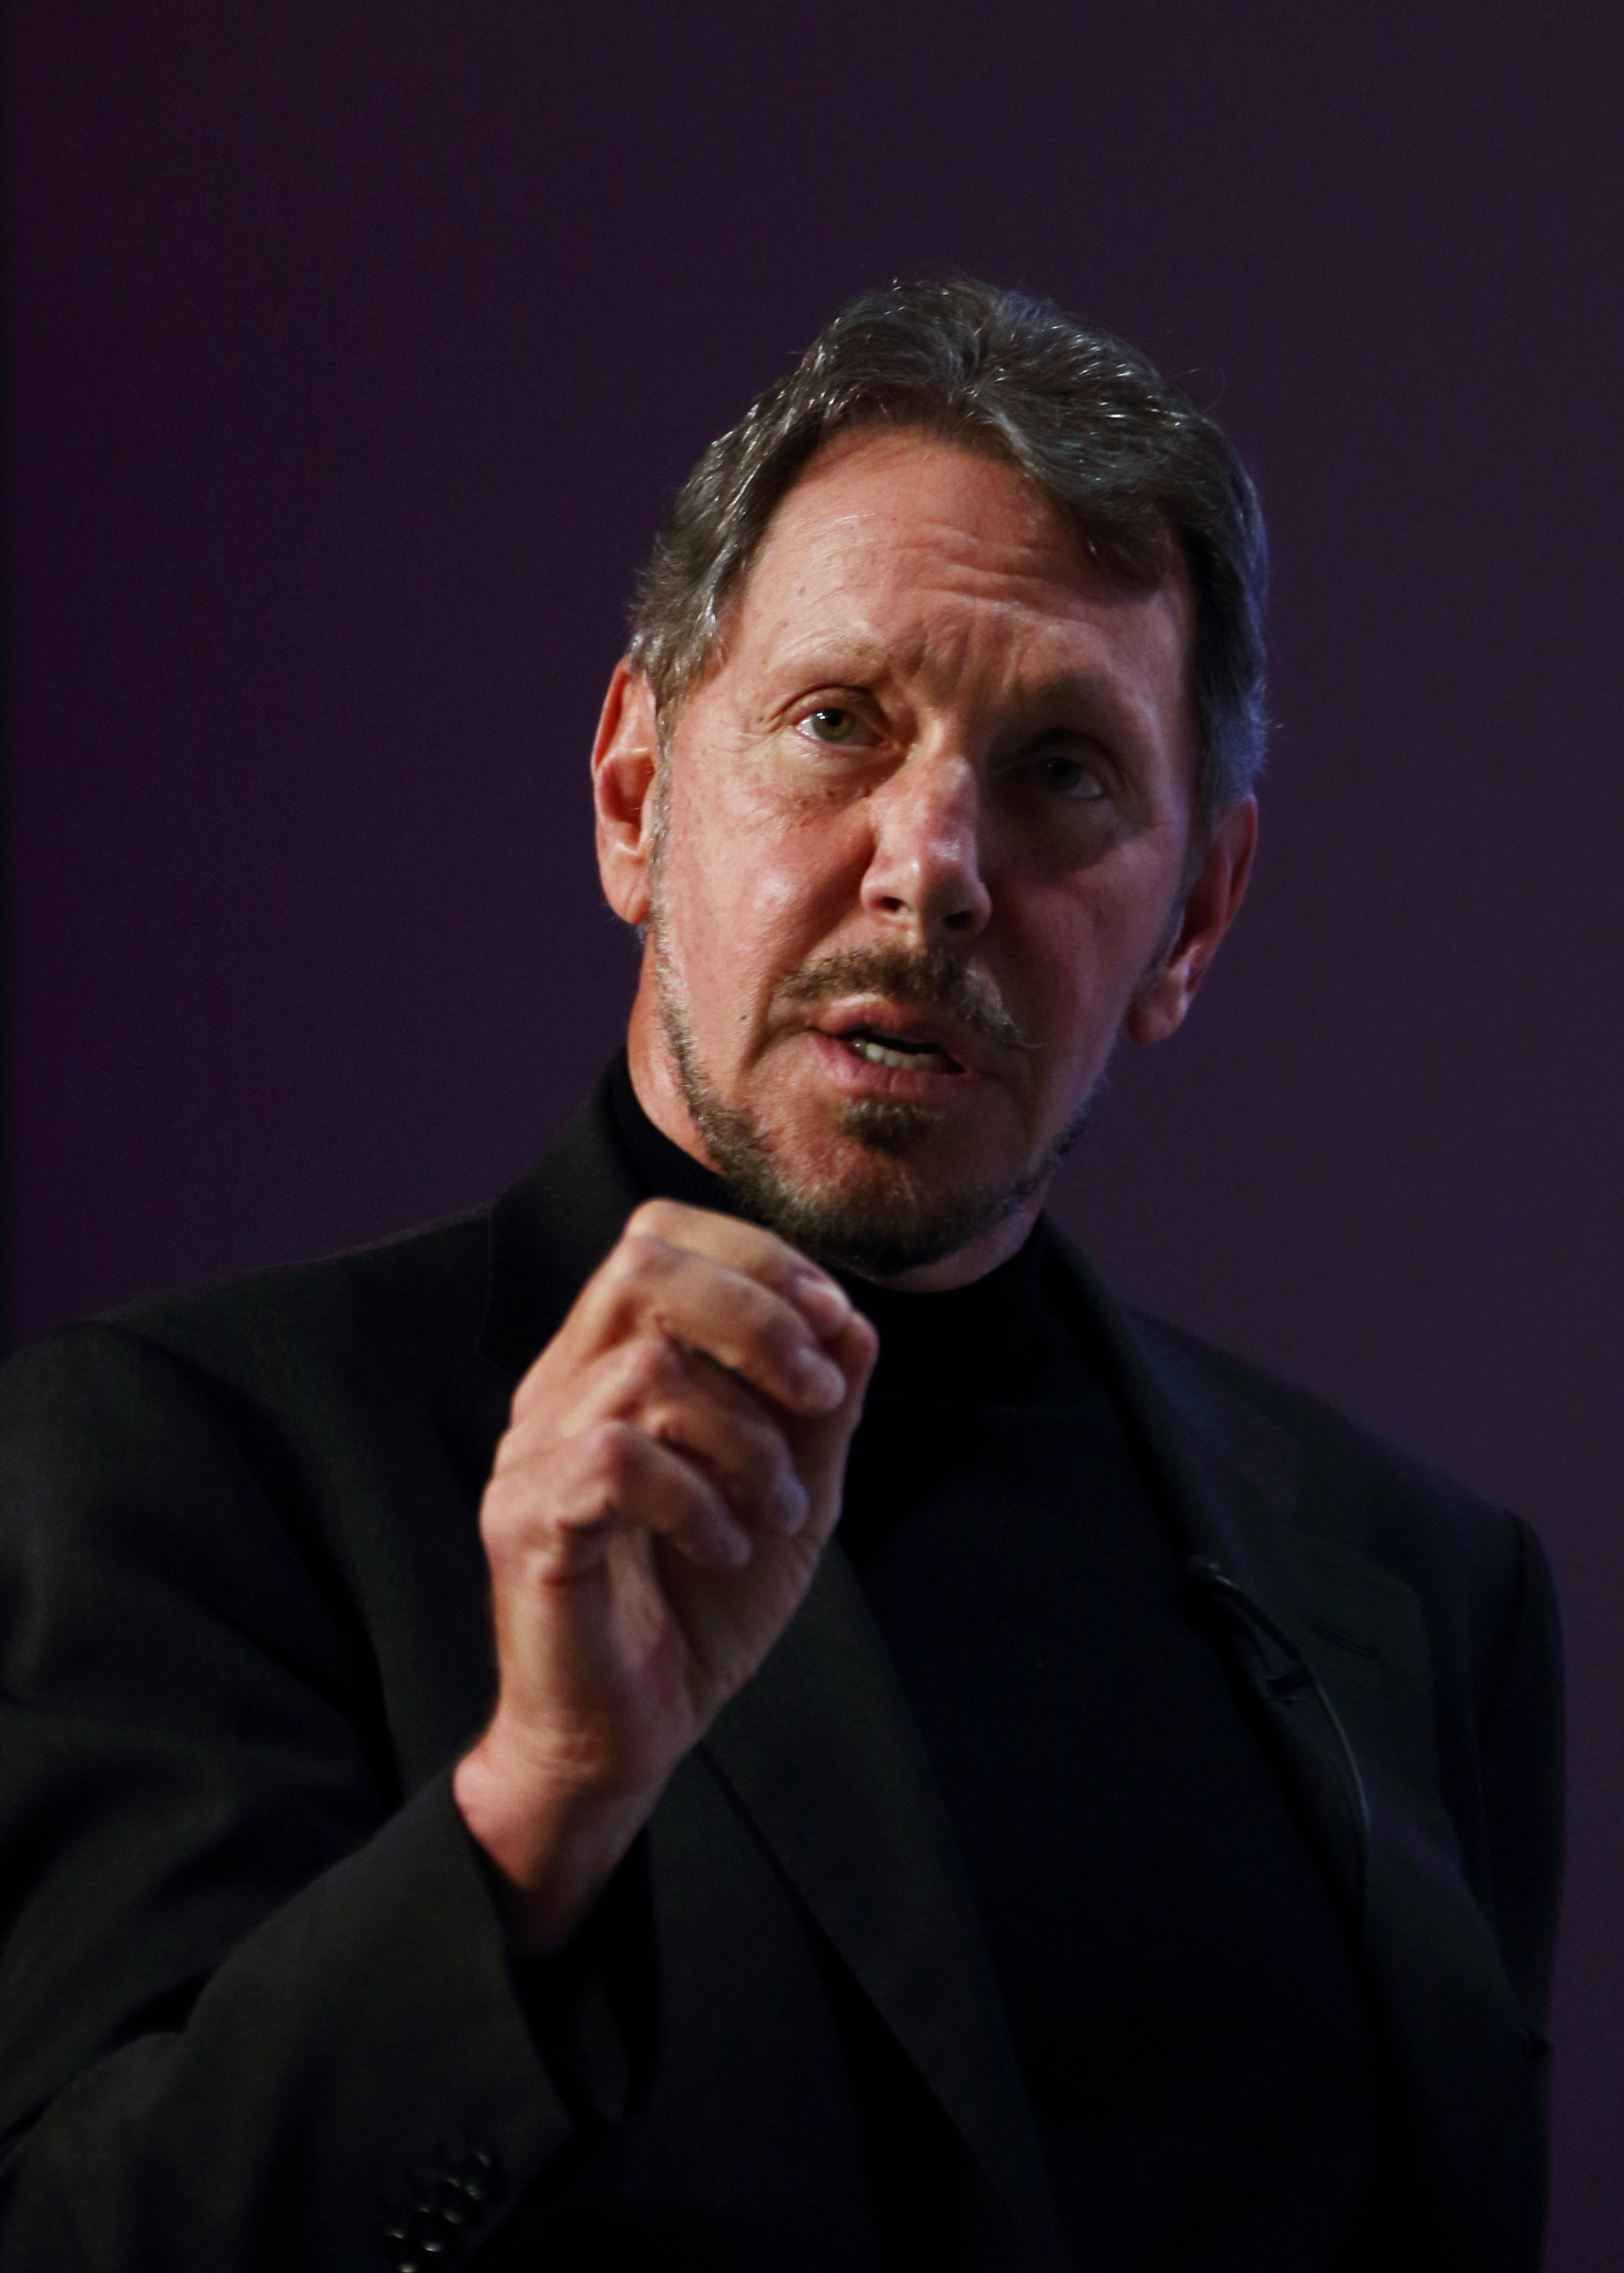 Larry Ellison, chief executive officer of Oracle Corp., makes a speech at the New Economy Summit 2014 in Tokyo on April 9, 2014. 